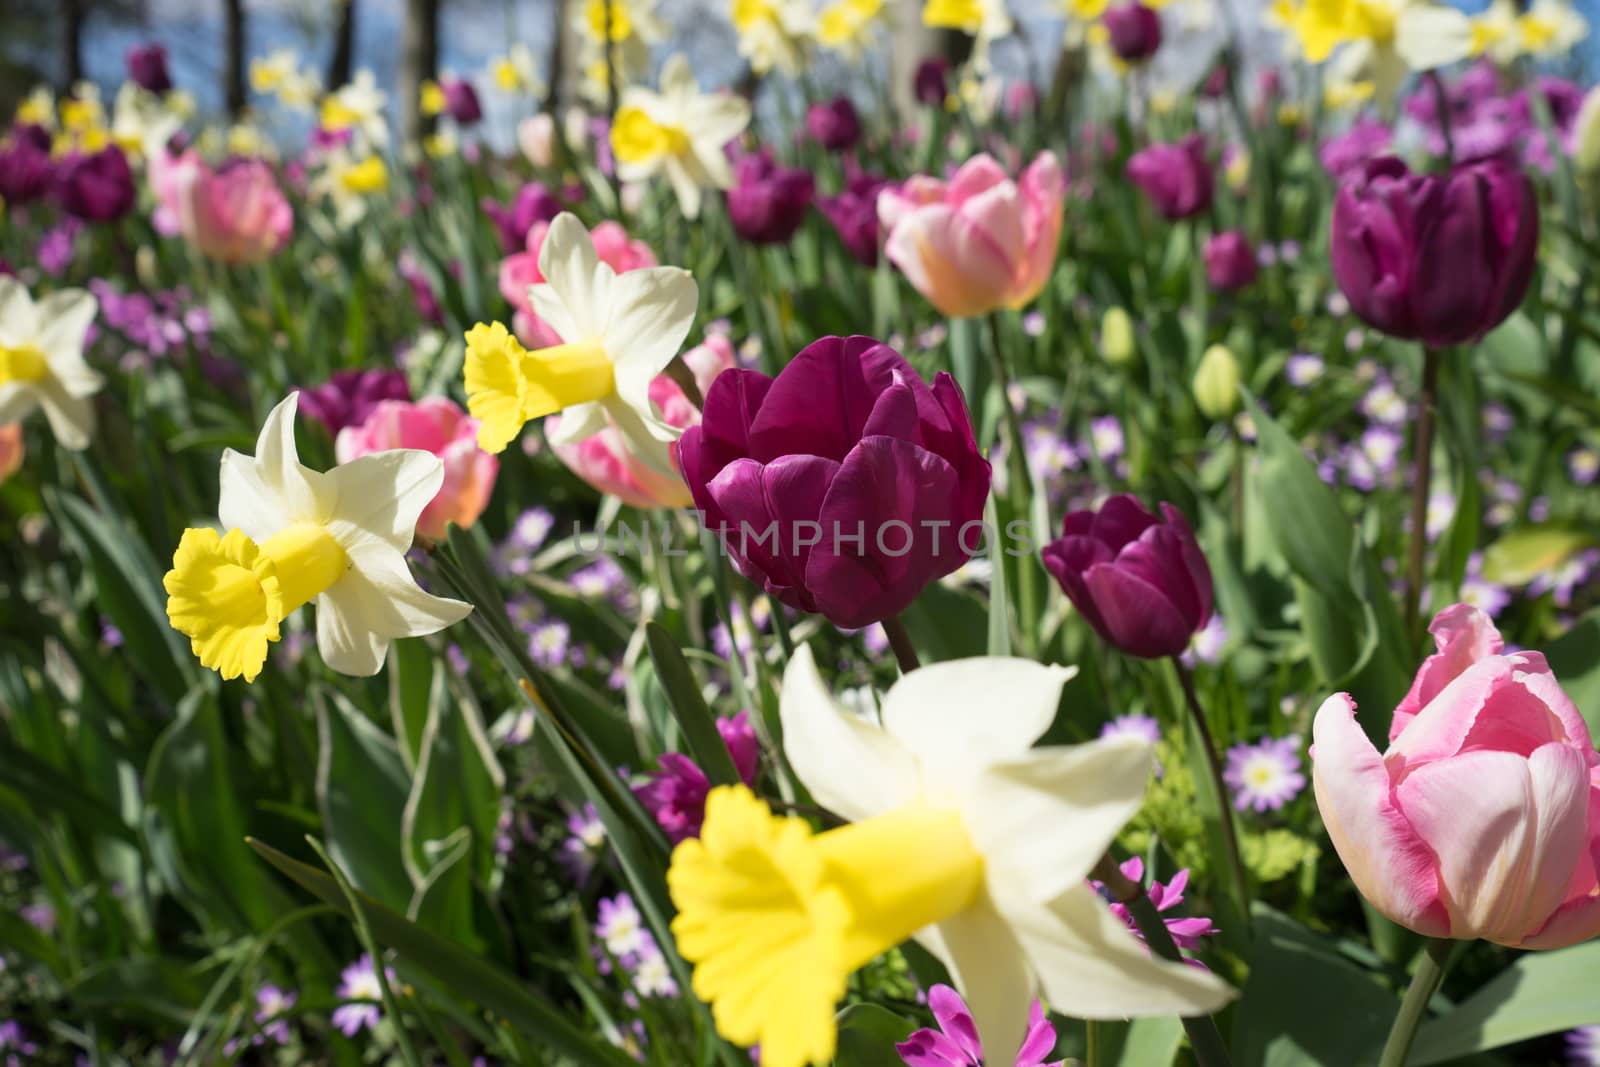 Yellow daffodil and pink tulip flowers in a garden in Lisse, Netherlands, Europe on a bright summer day